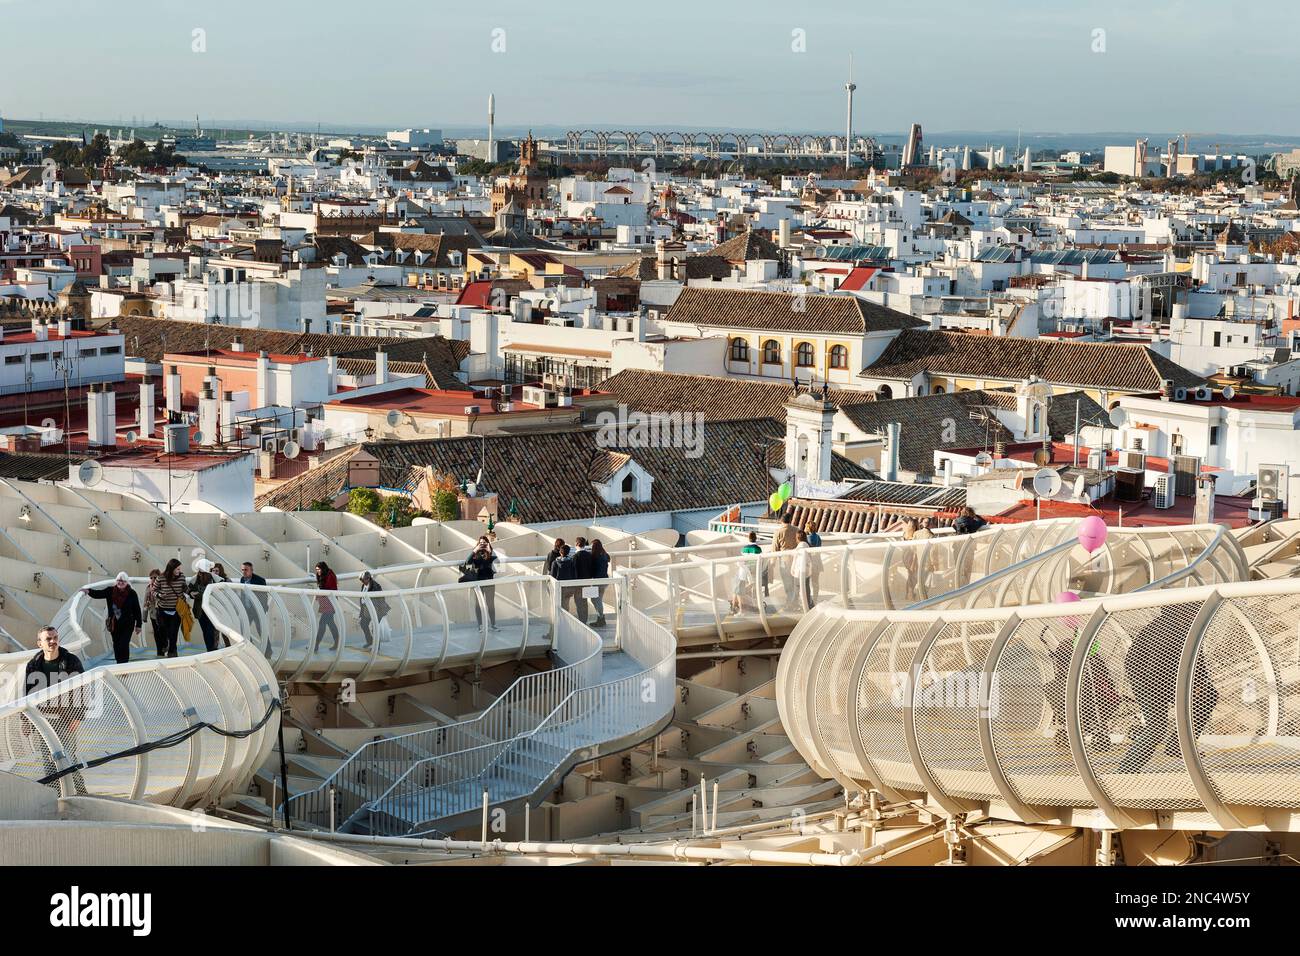 Seville-Andalusia-Spain, December 12. 2019: Panoramic view of the city Seville and Metropolitan Parasol building. Stock Photo